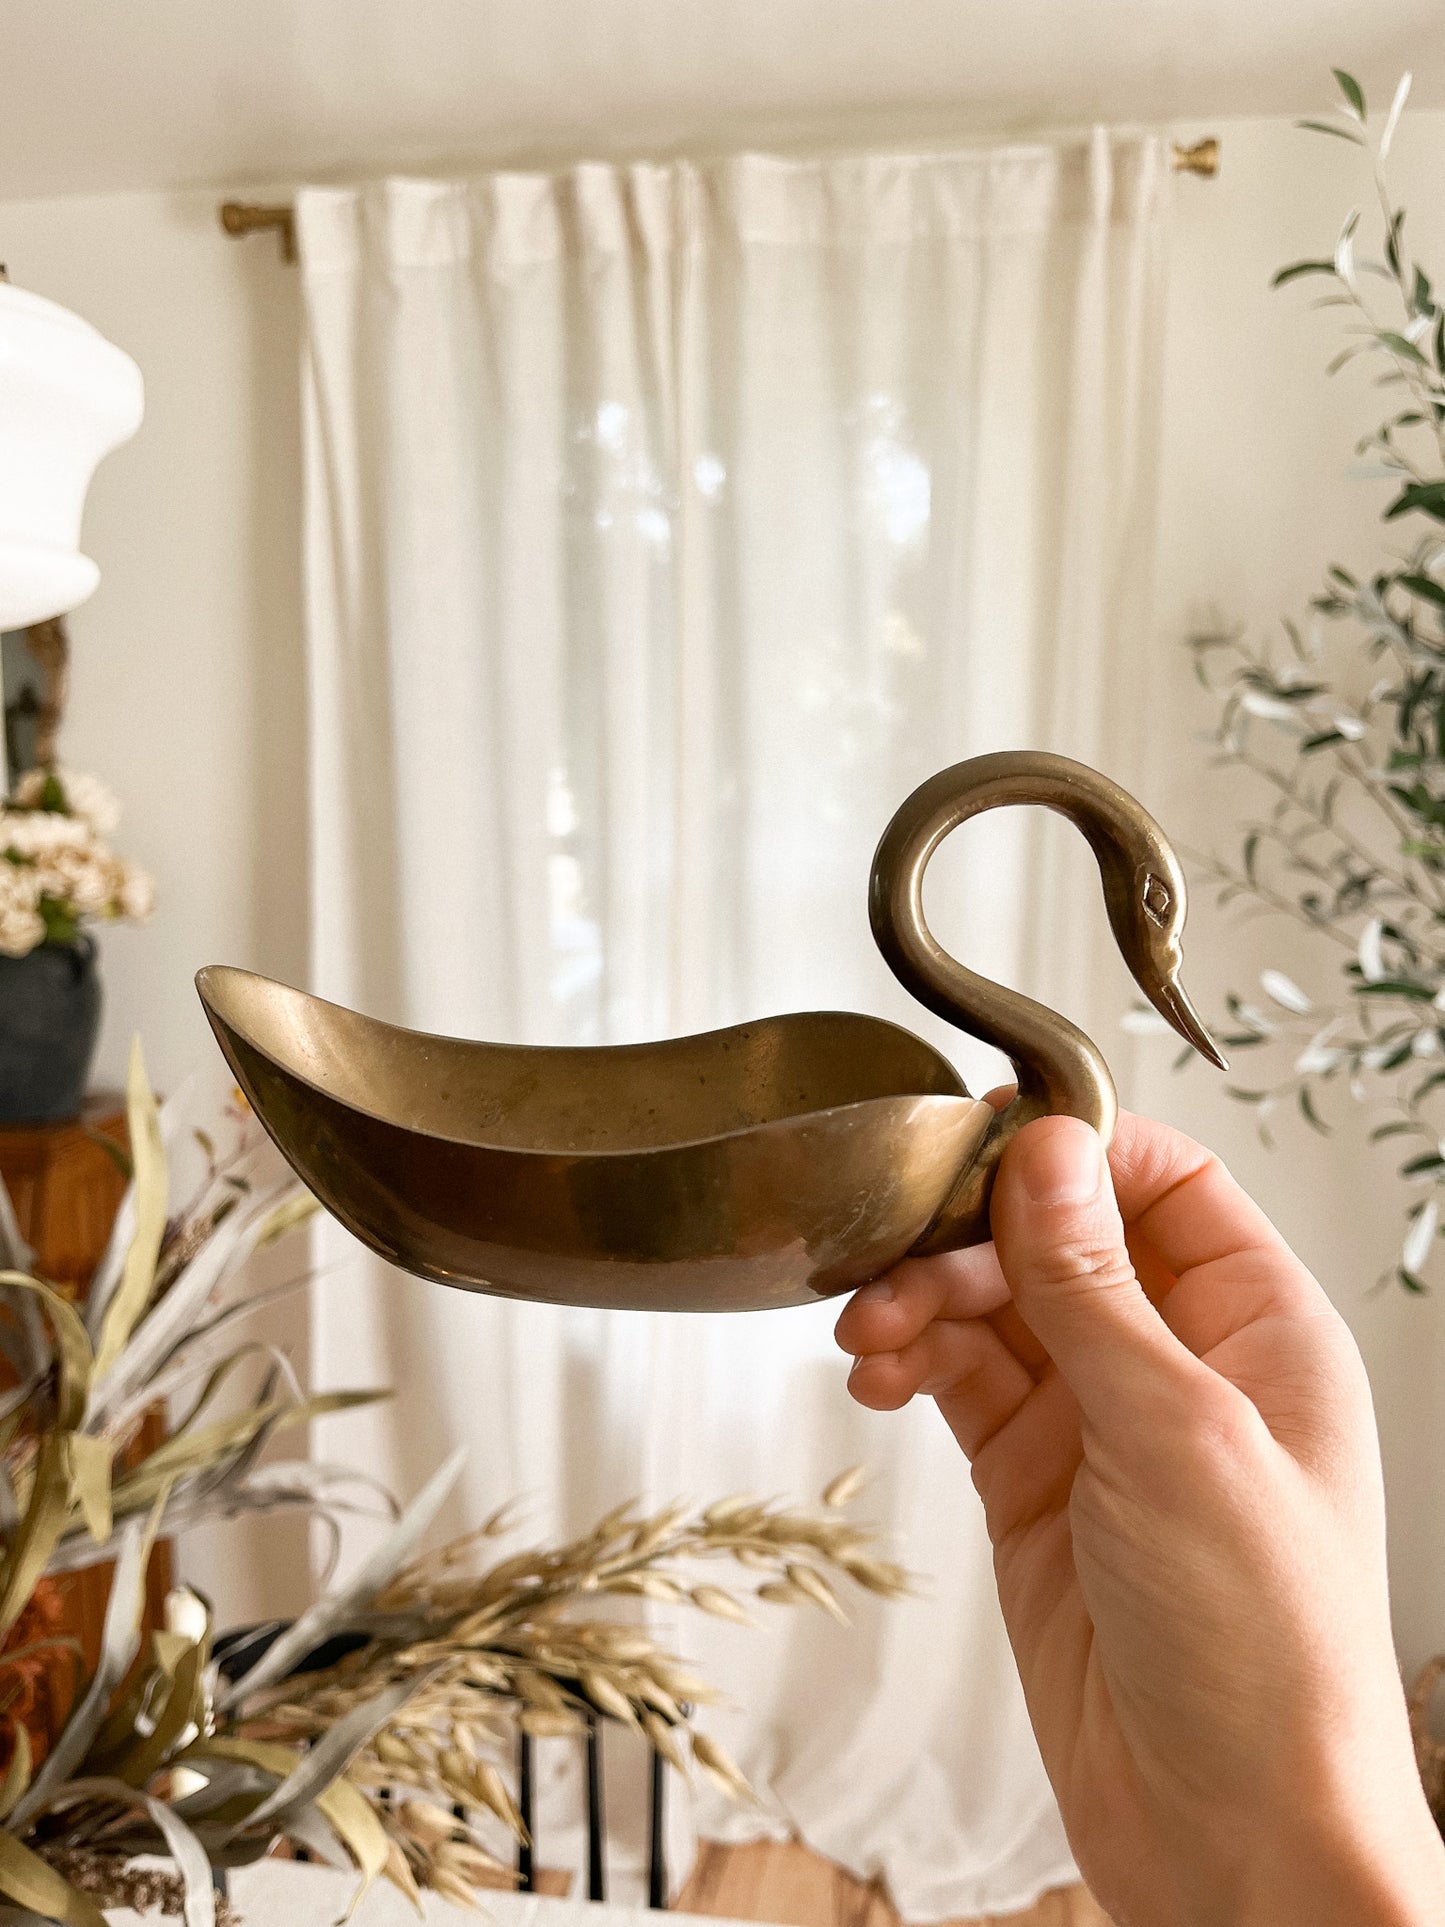 Solid Brass Swan Soap Dish